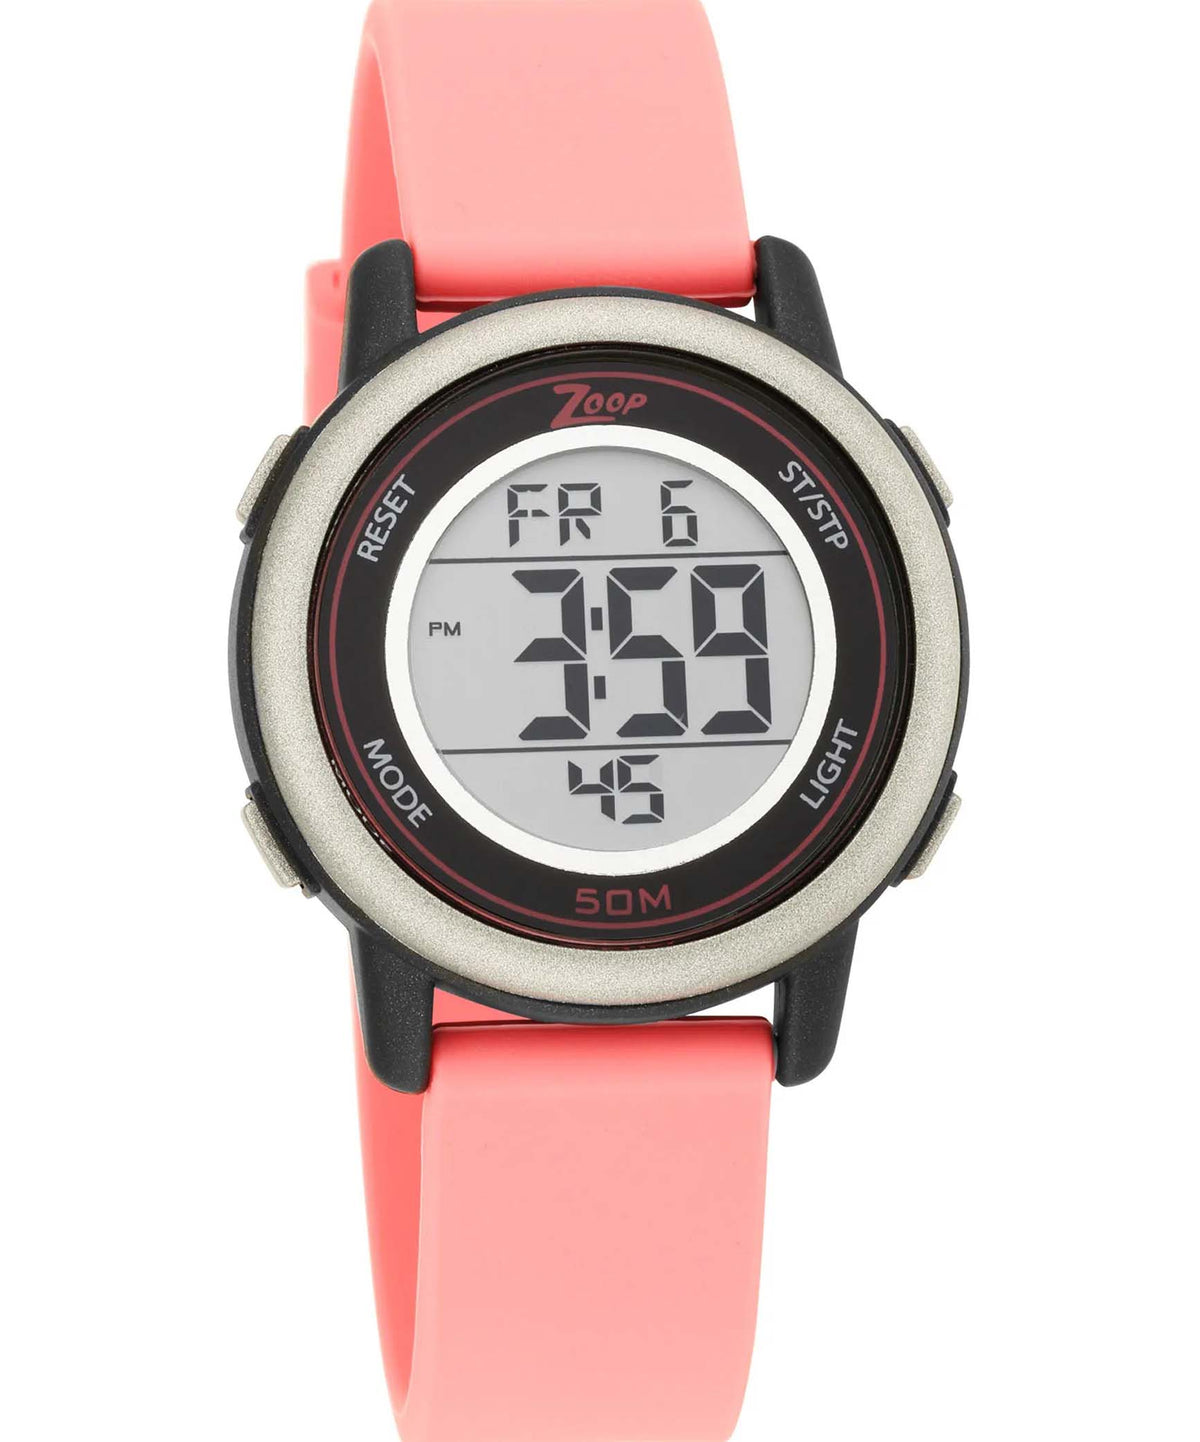 Zoop By Titan Kids Unisex Collection Digital Watch, Black Dial Pink Silicone Strap, 16015PP05